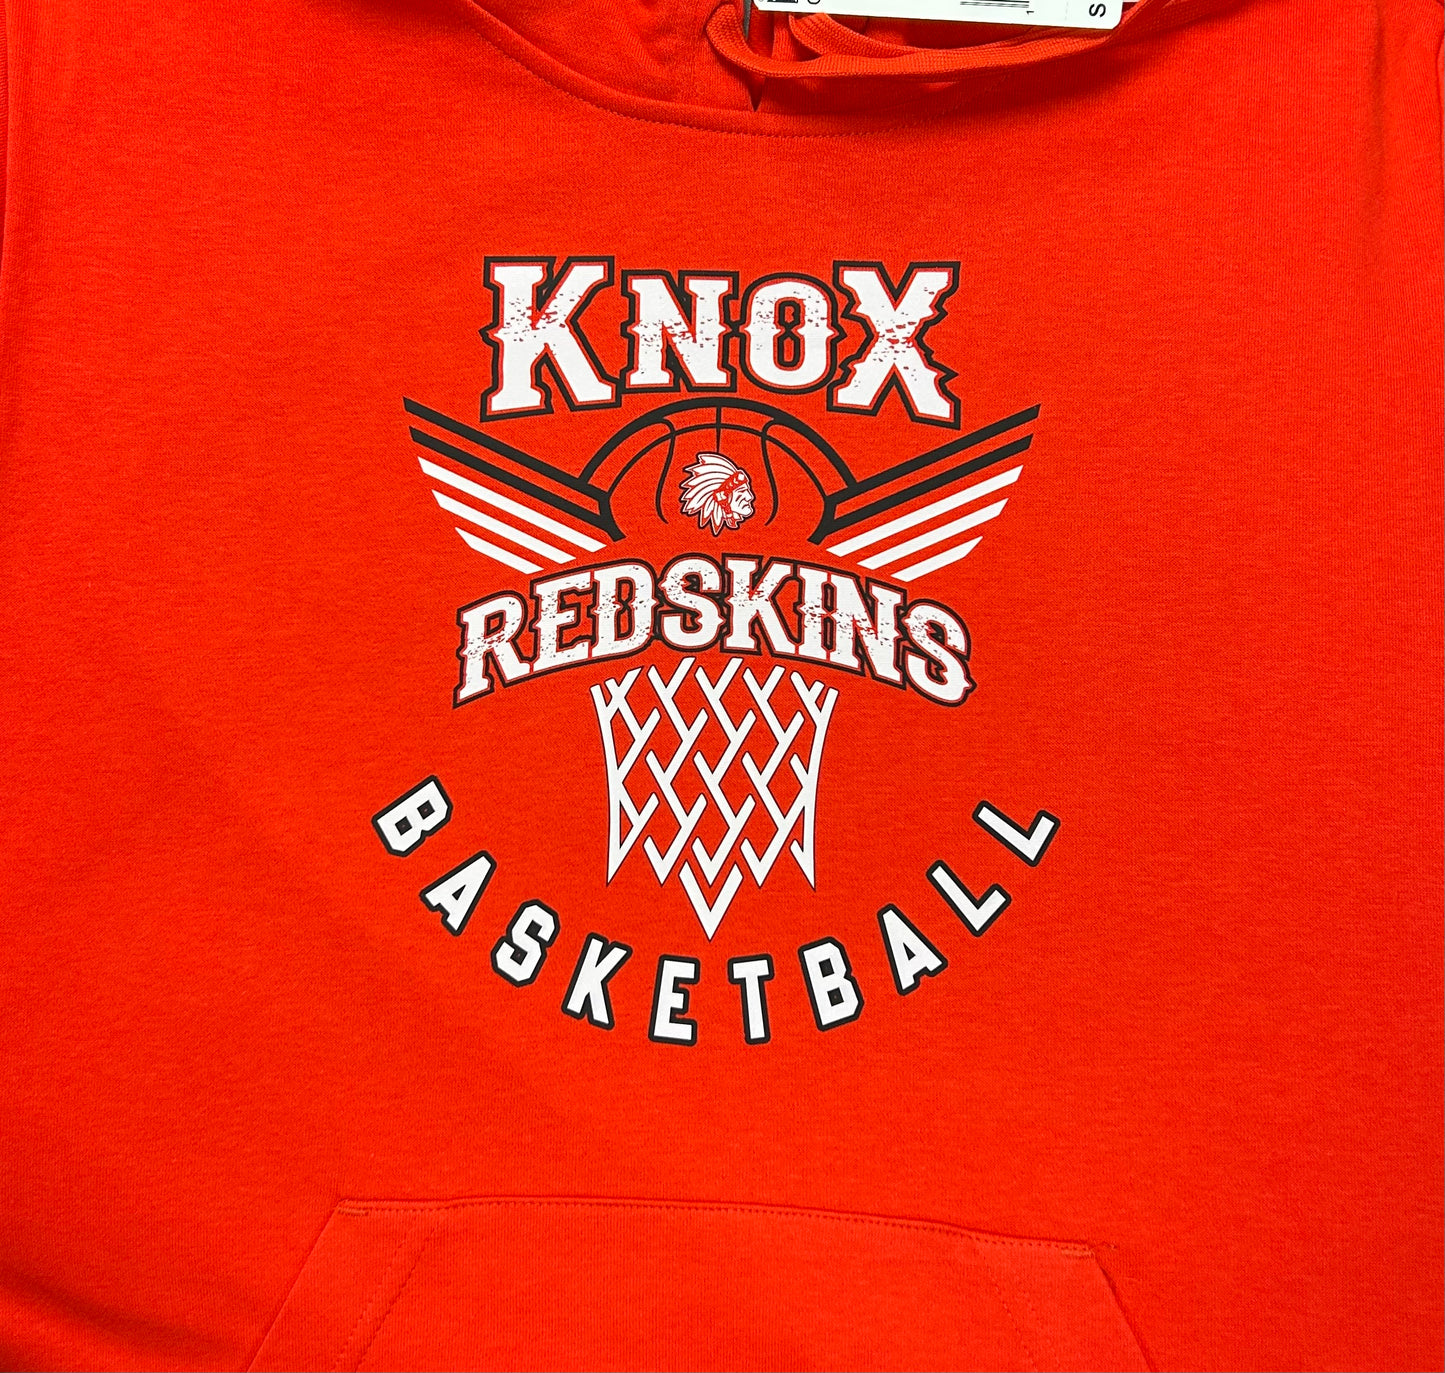 Knox Redskins Basketball T-shirt - Red - Adult and Youth Sizes